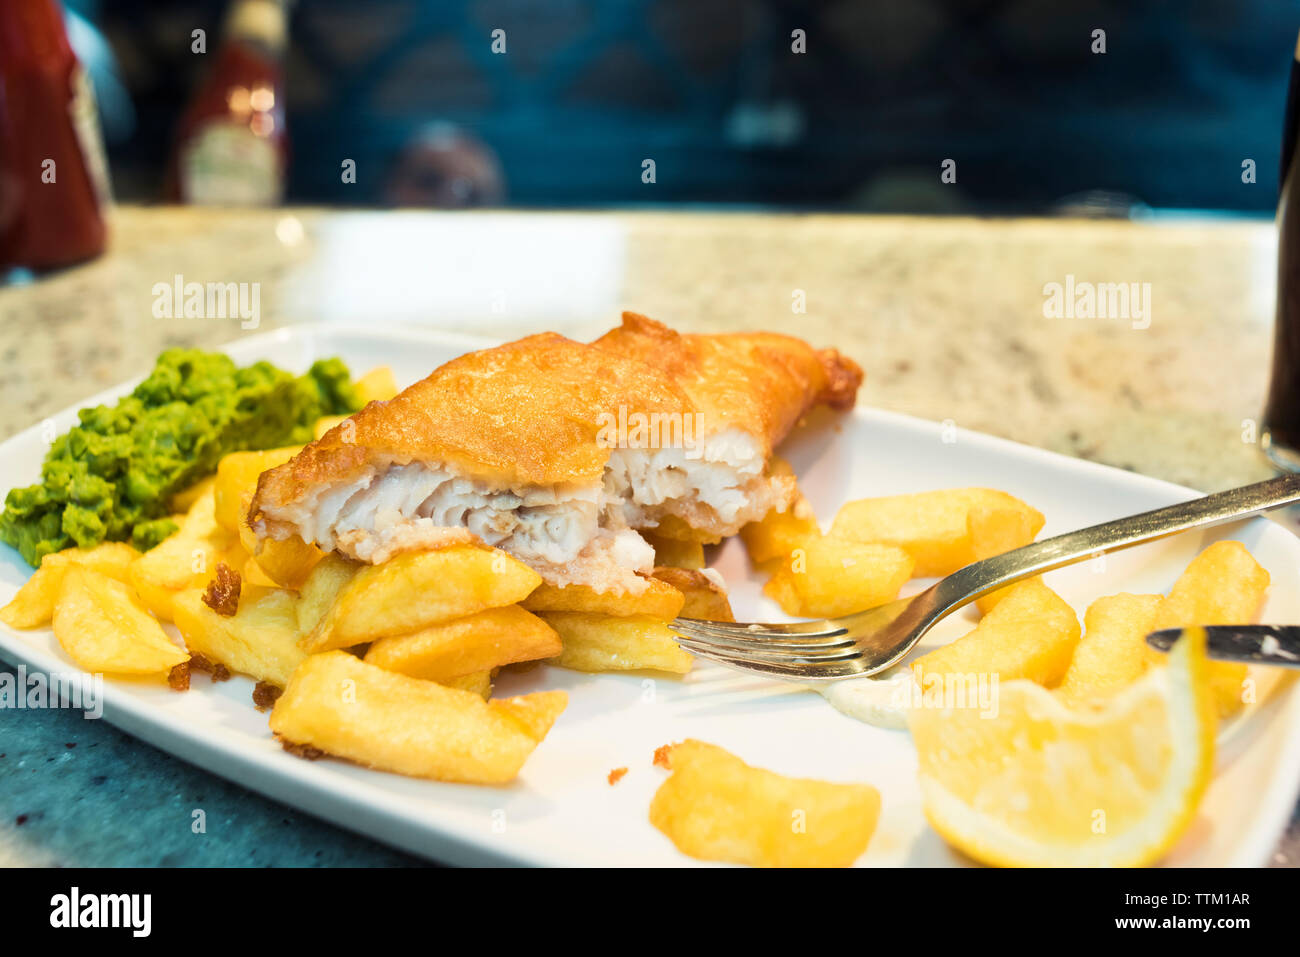 Close-up of fish with French fries and lemon slice in plate on table at restaurant Stock Photo